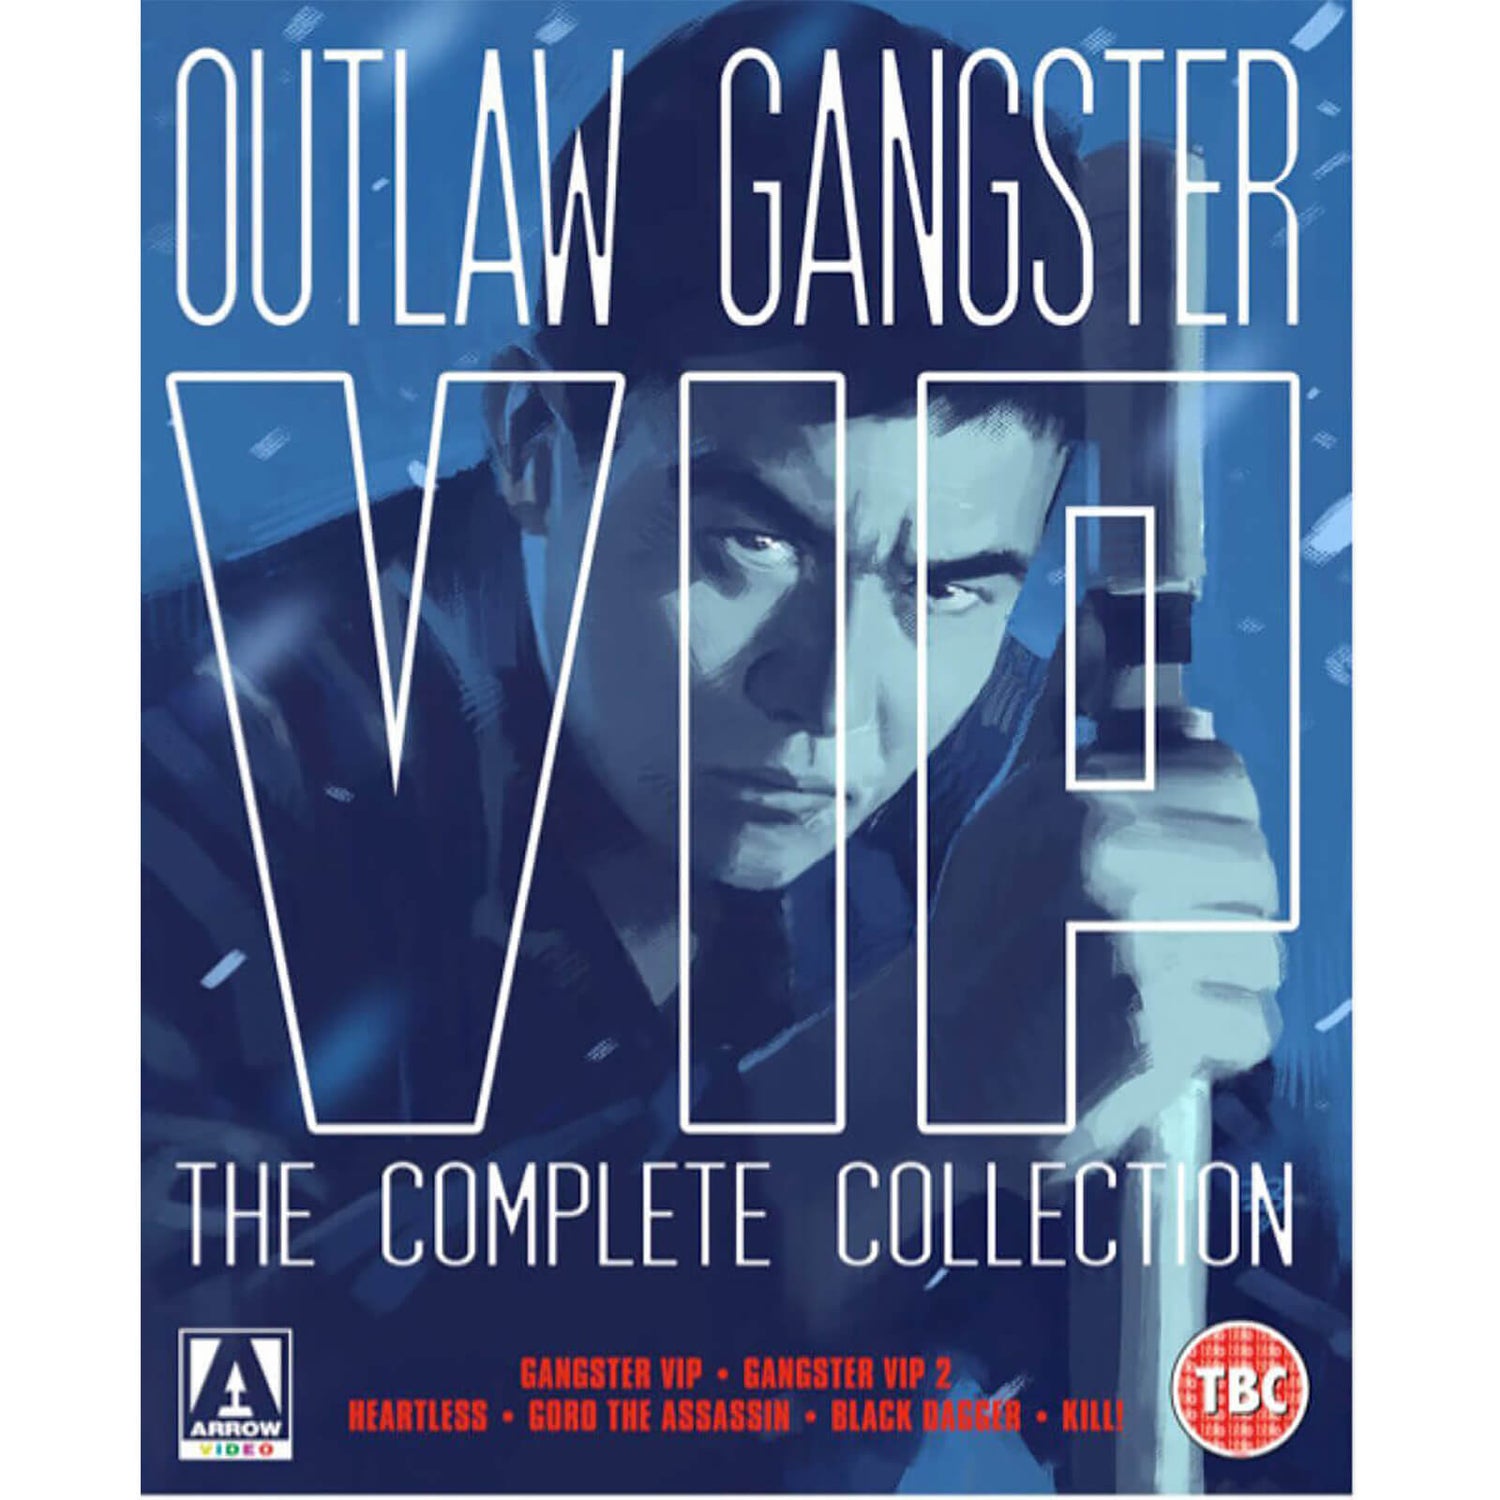 Outlaw: Gangster VIP Collection - Dual Format (Includes DVD)